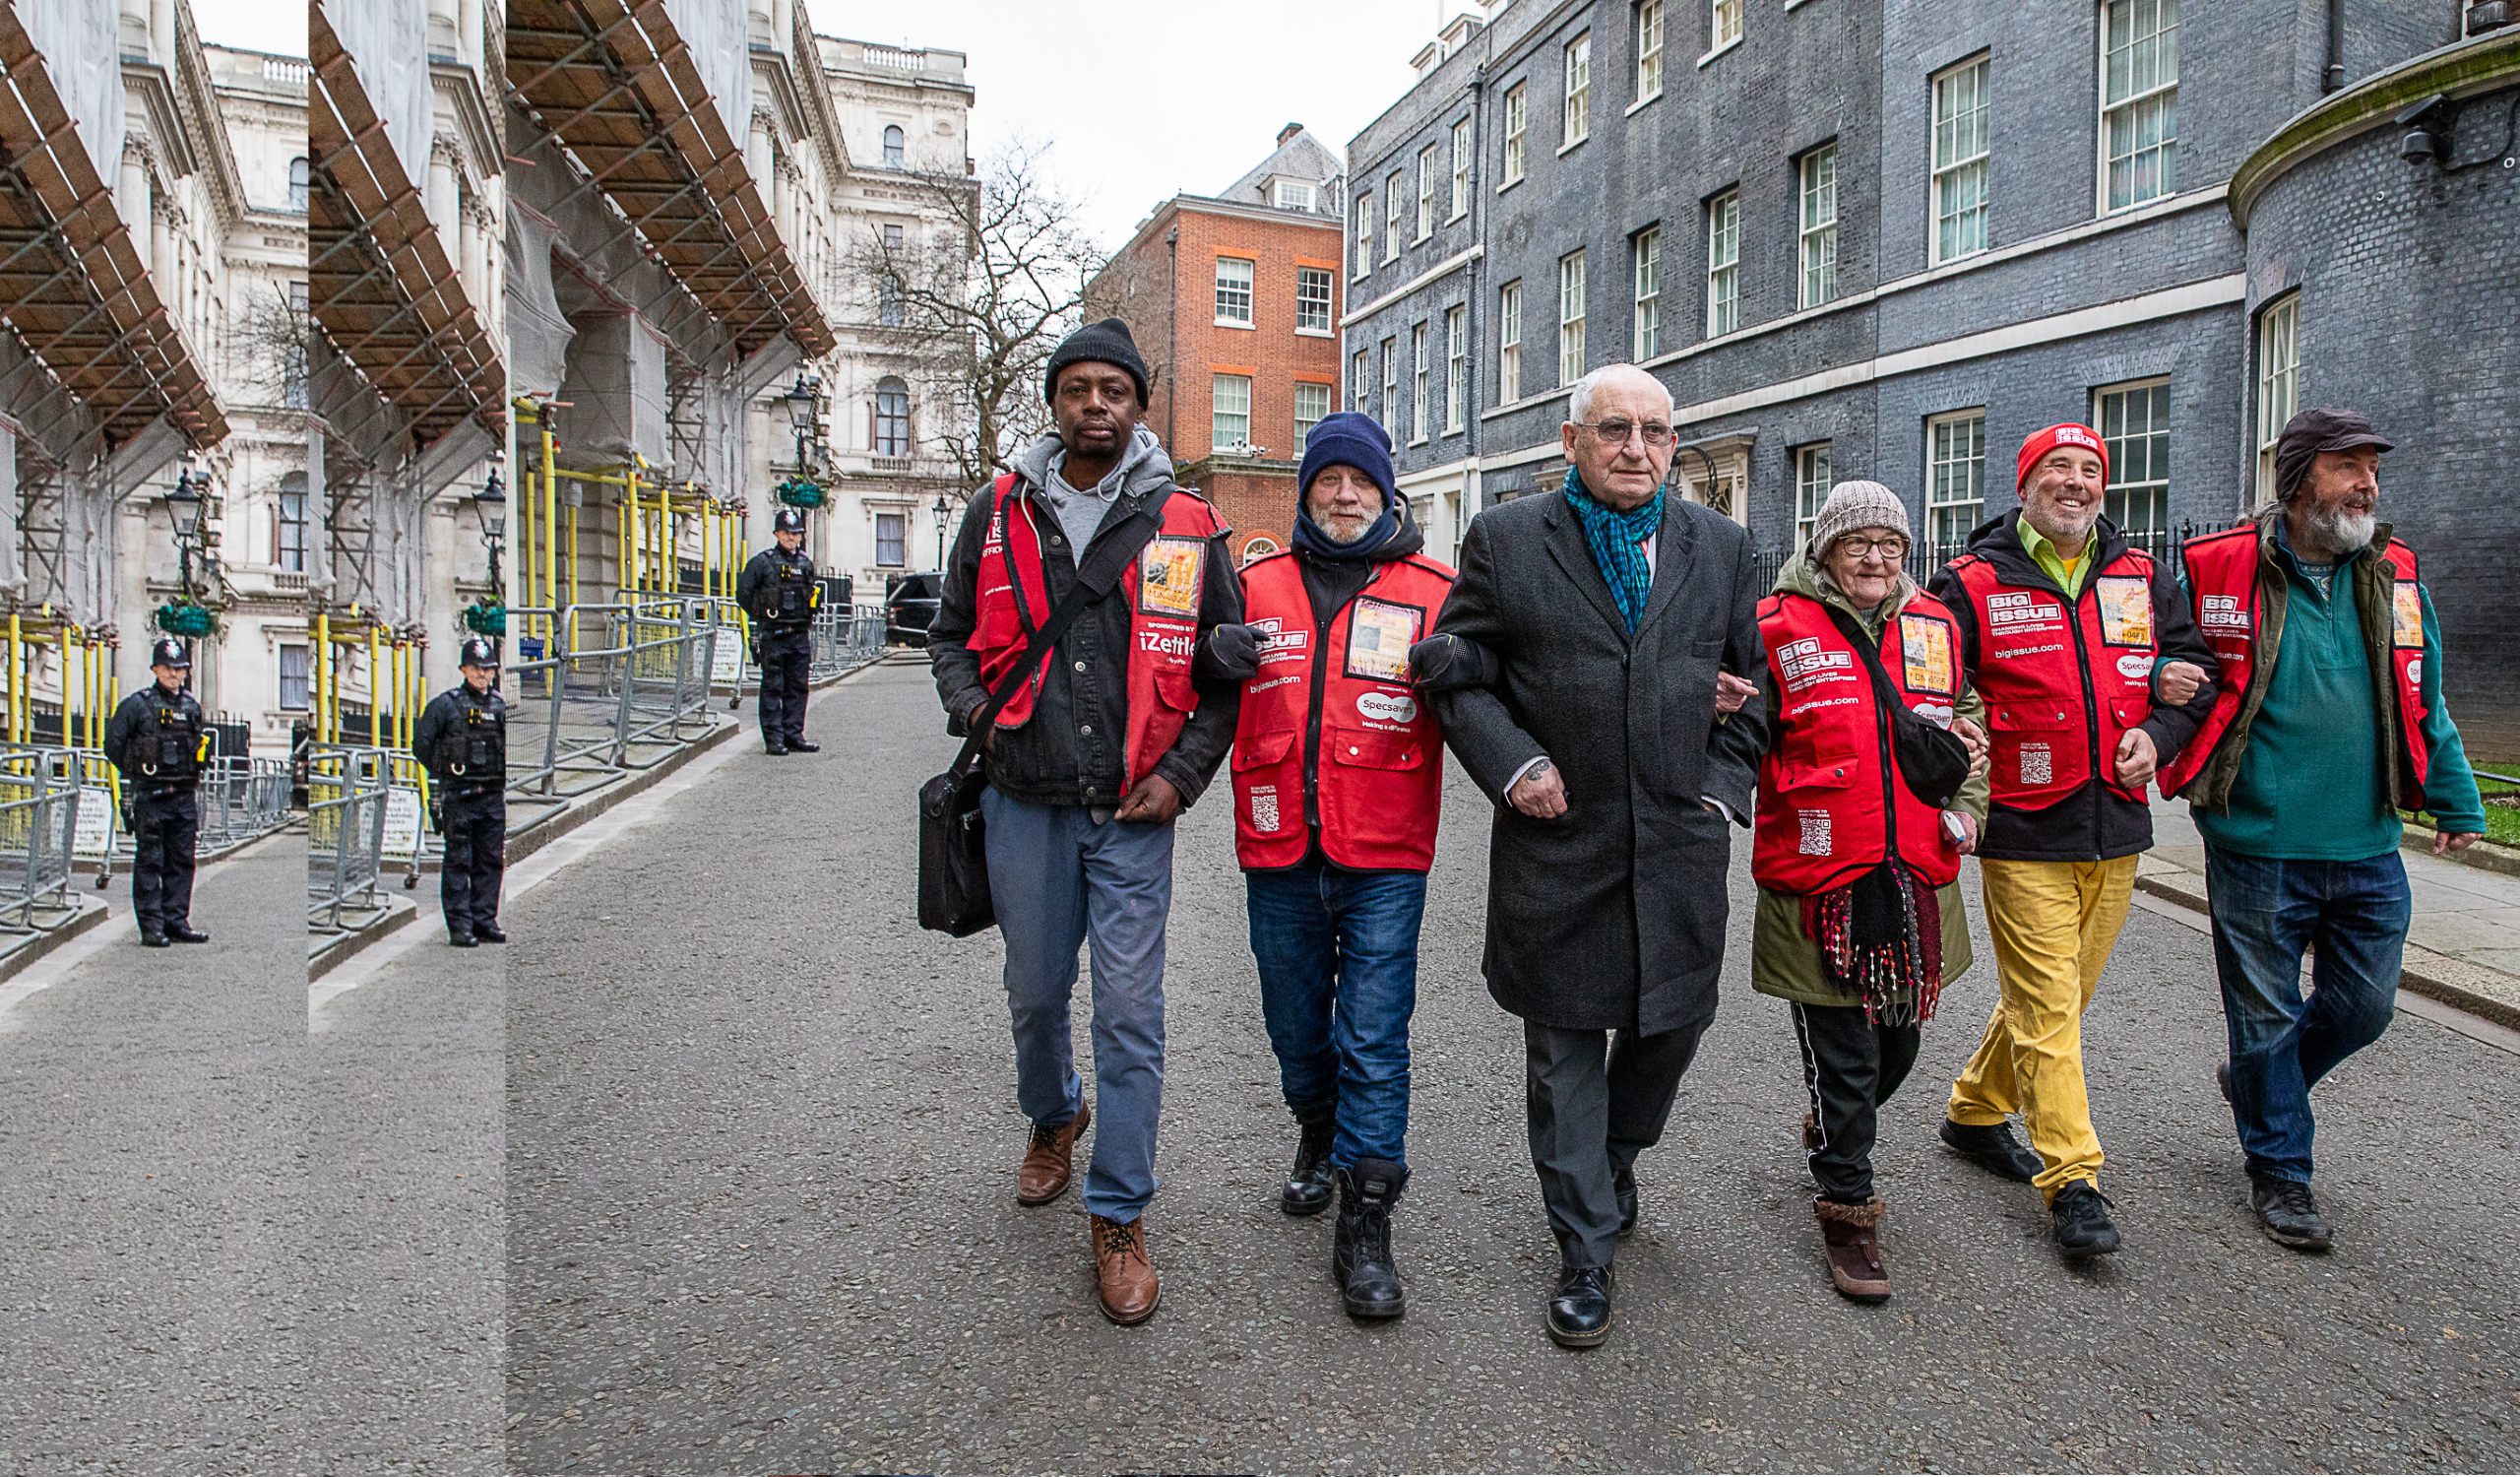 A group of Big Issue vendors and Lord Bird walk arm in arm on their way back from 10 Downing Street